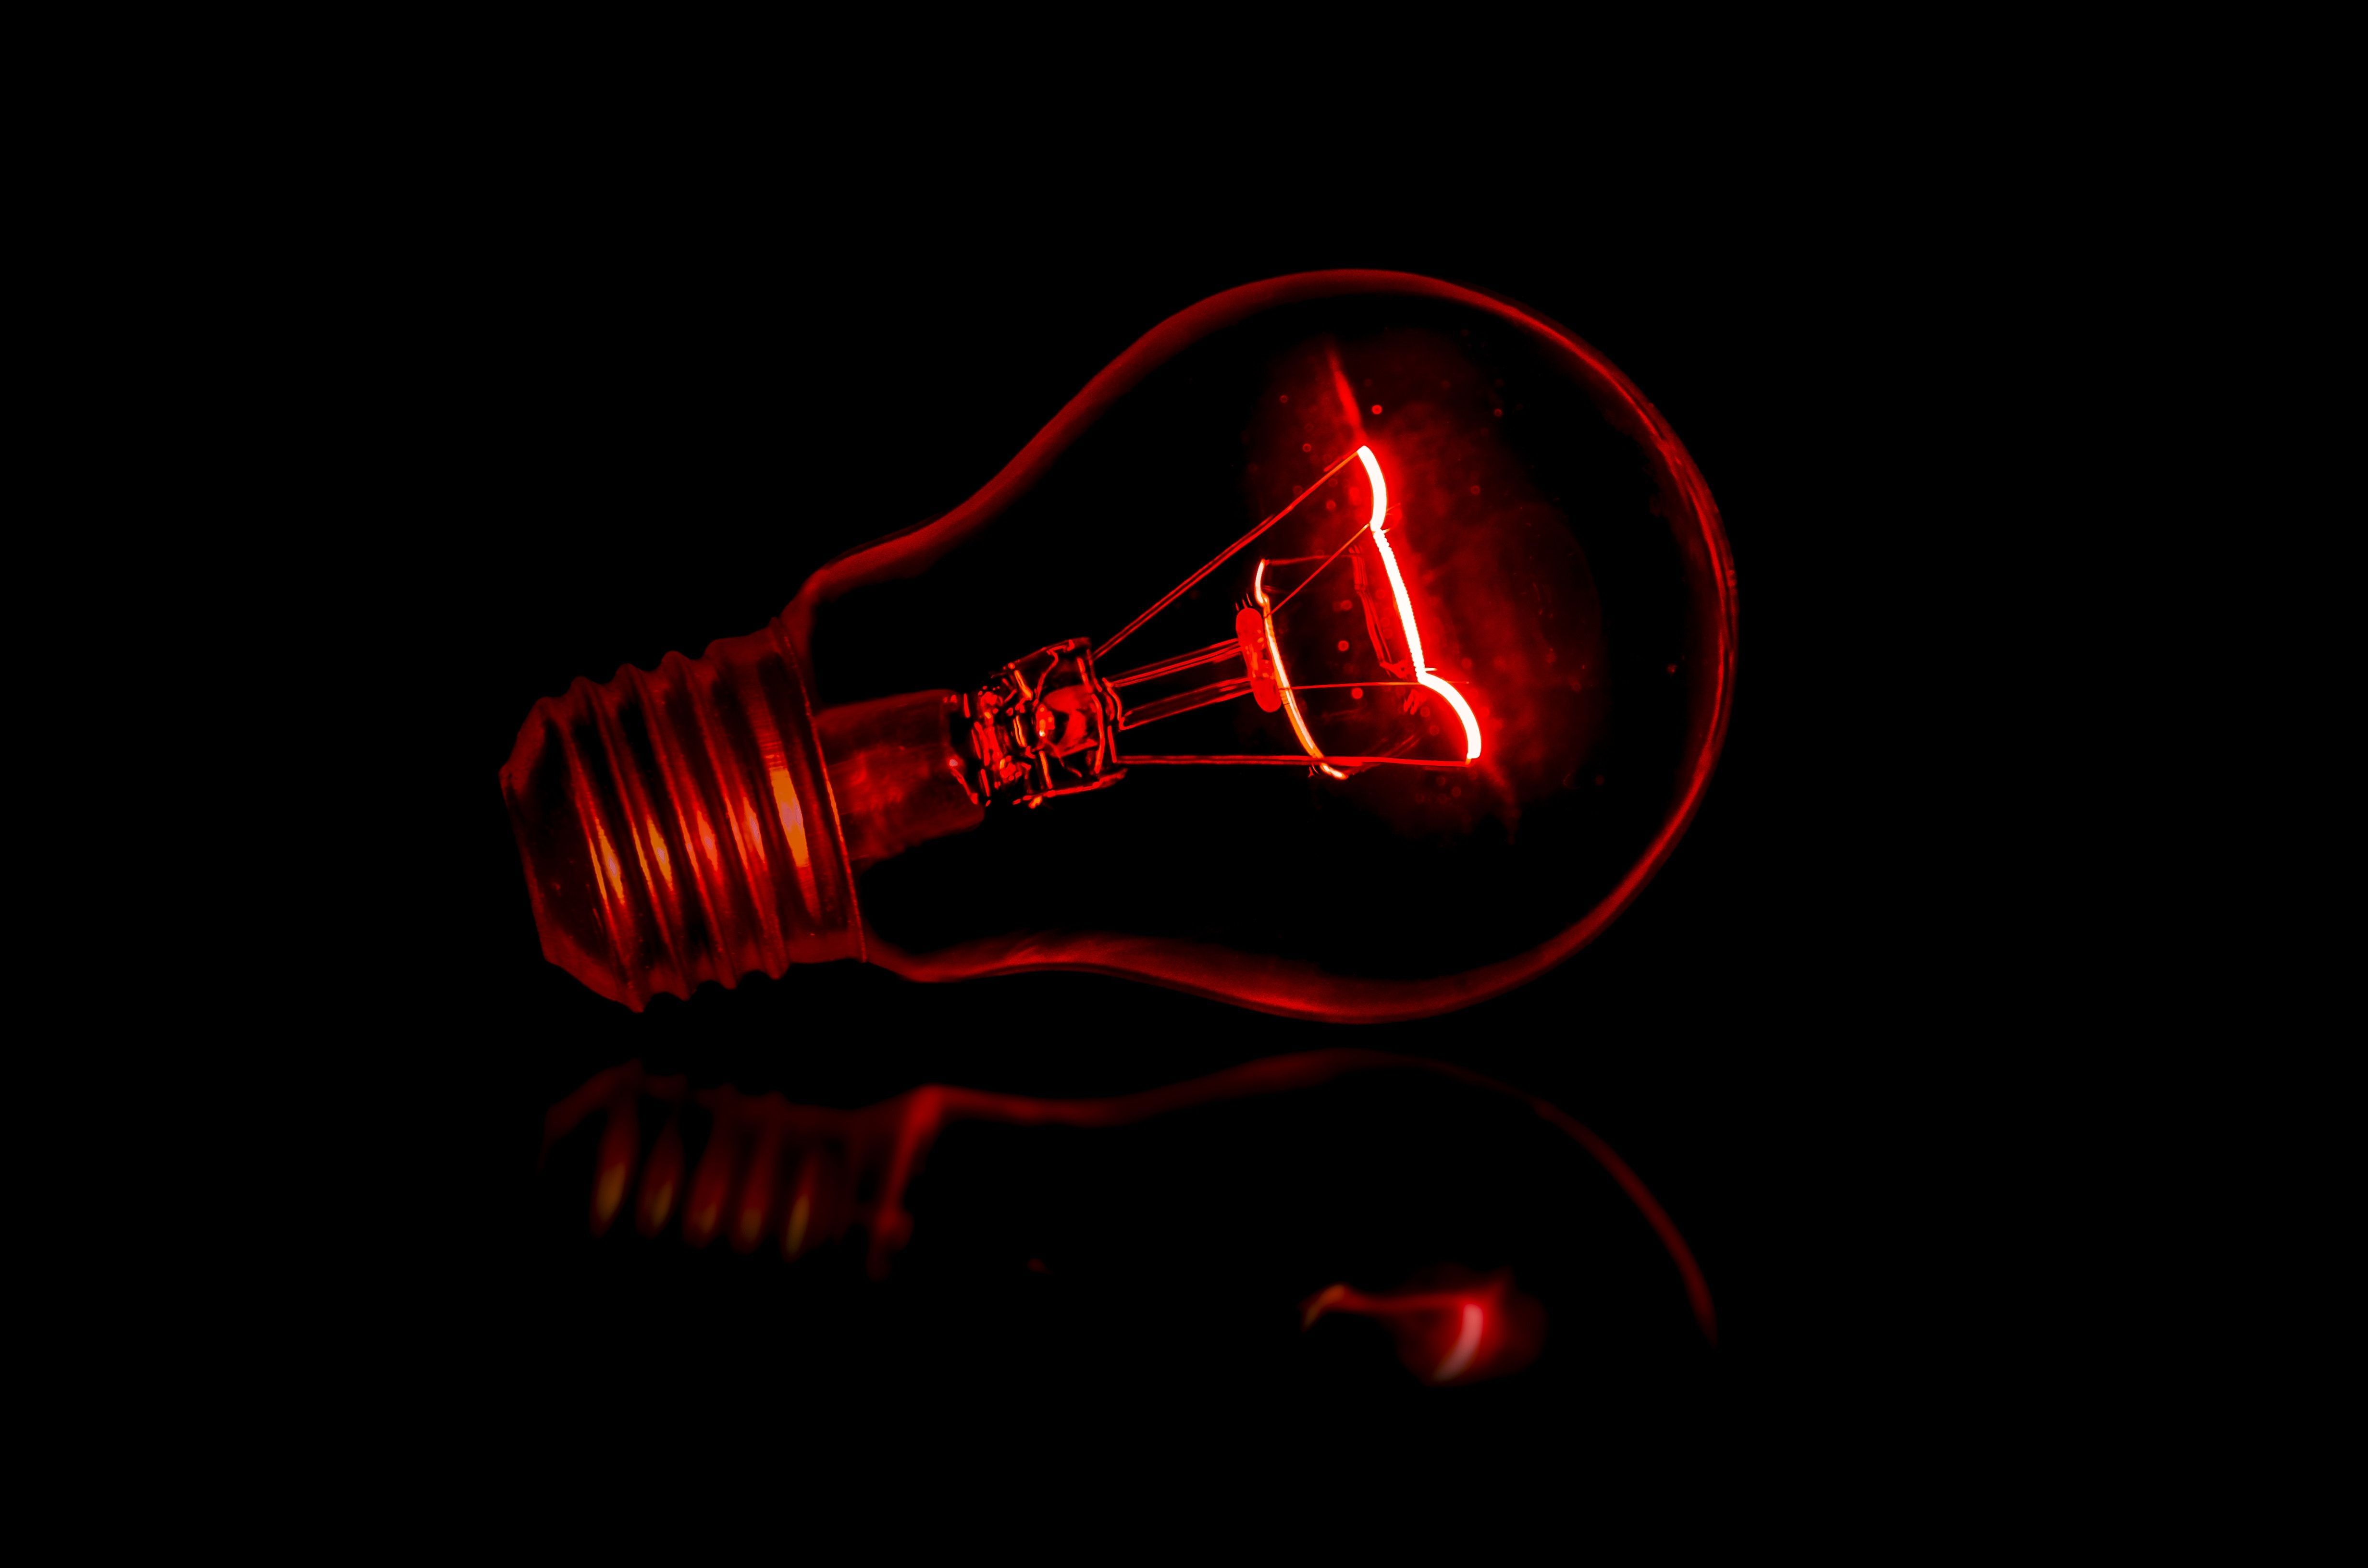 LimitlessRed #Ideas #Think #Passion #Energy #Action #RED